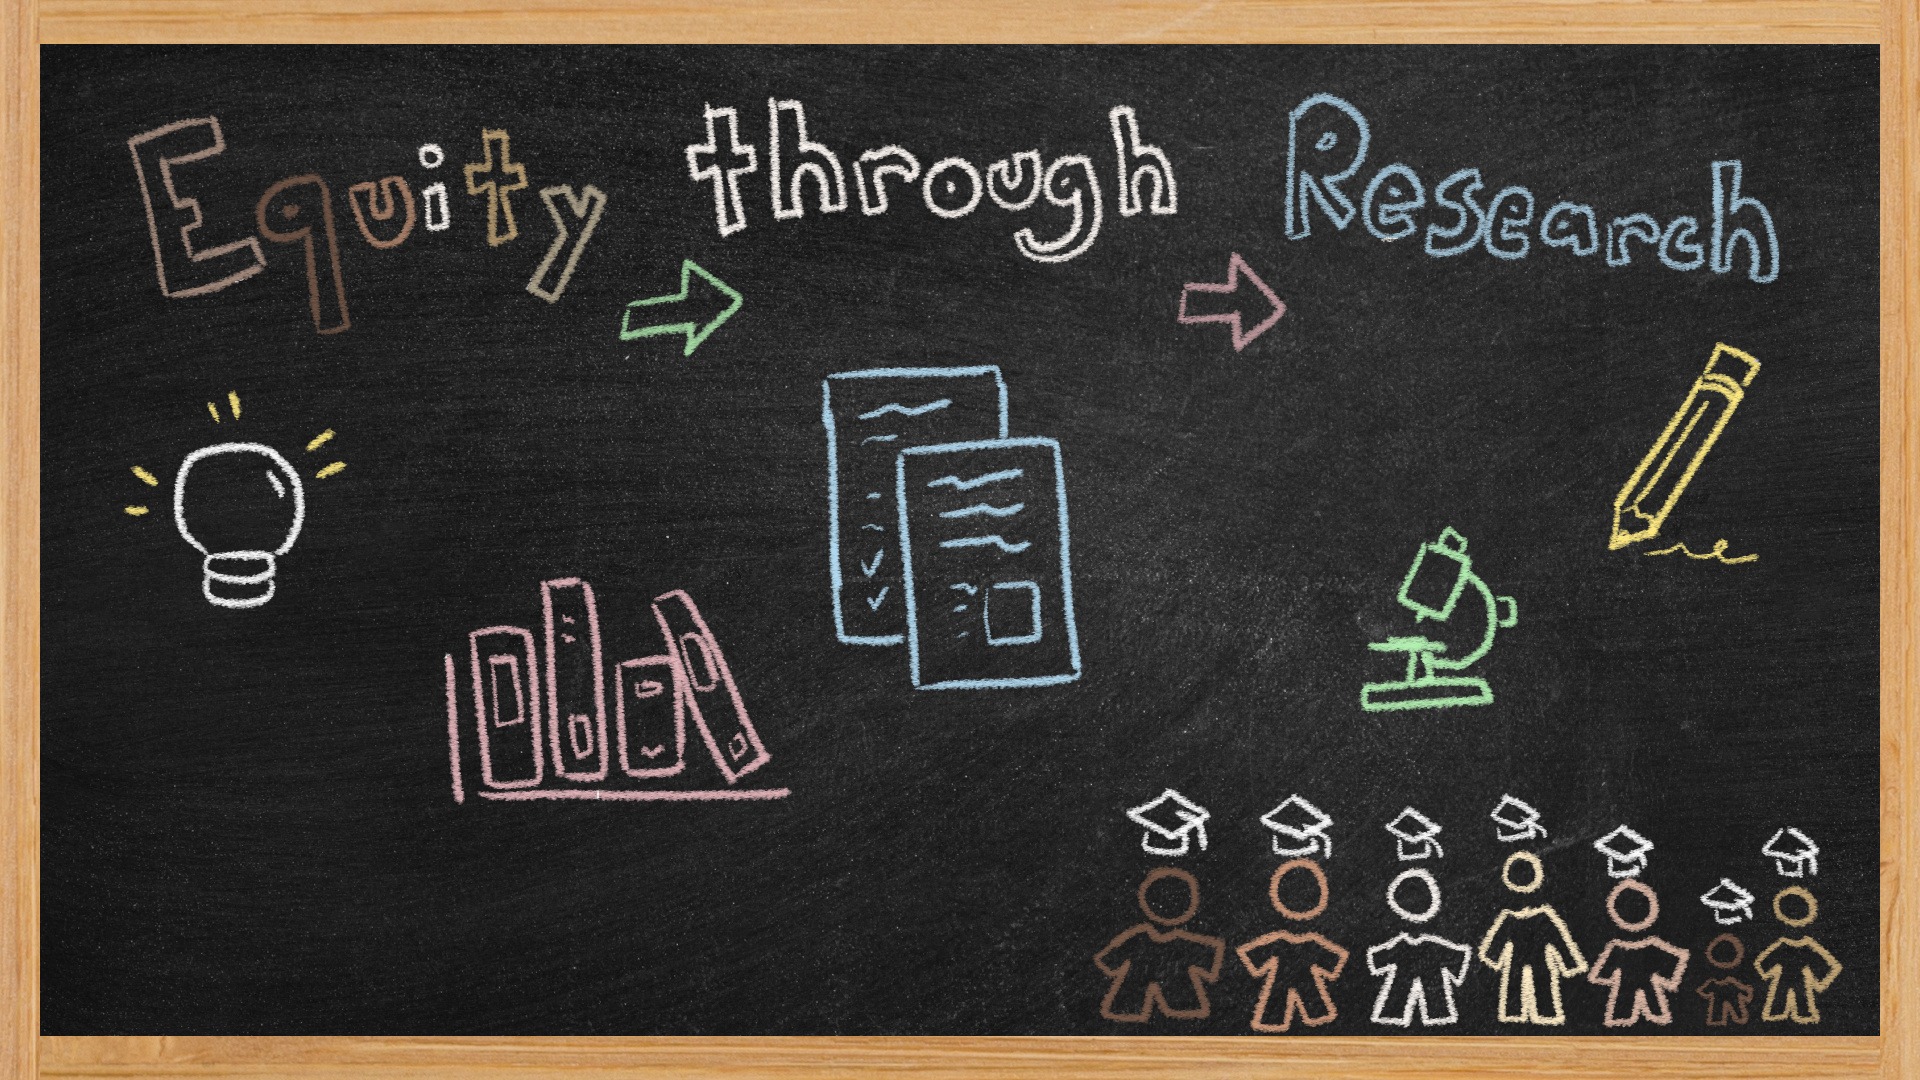 The image background is a blackboard. The words and images are colored chalk outlines. The phrase Equity through Research is on top. The fours images in the center from from left to right are: 1) a white light bulb with yellow idea sparks, 2) a vertical stack of four red books with their spines facing outward, 3) two blue pages with squizzles and a box representing text and an image, and 4) a green microscope. In the bottom right corner, there are stick figures with various heights and various shades of skin tone colors from white to dark brown, each with a white graduation cap above the head.